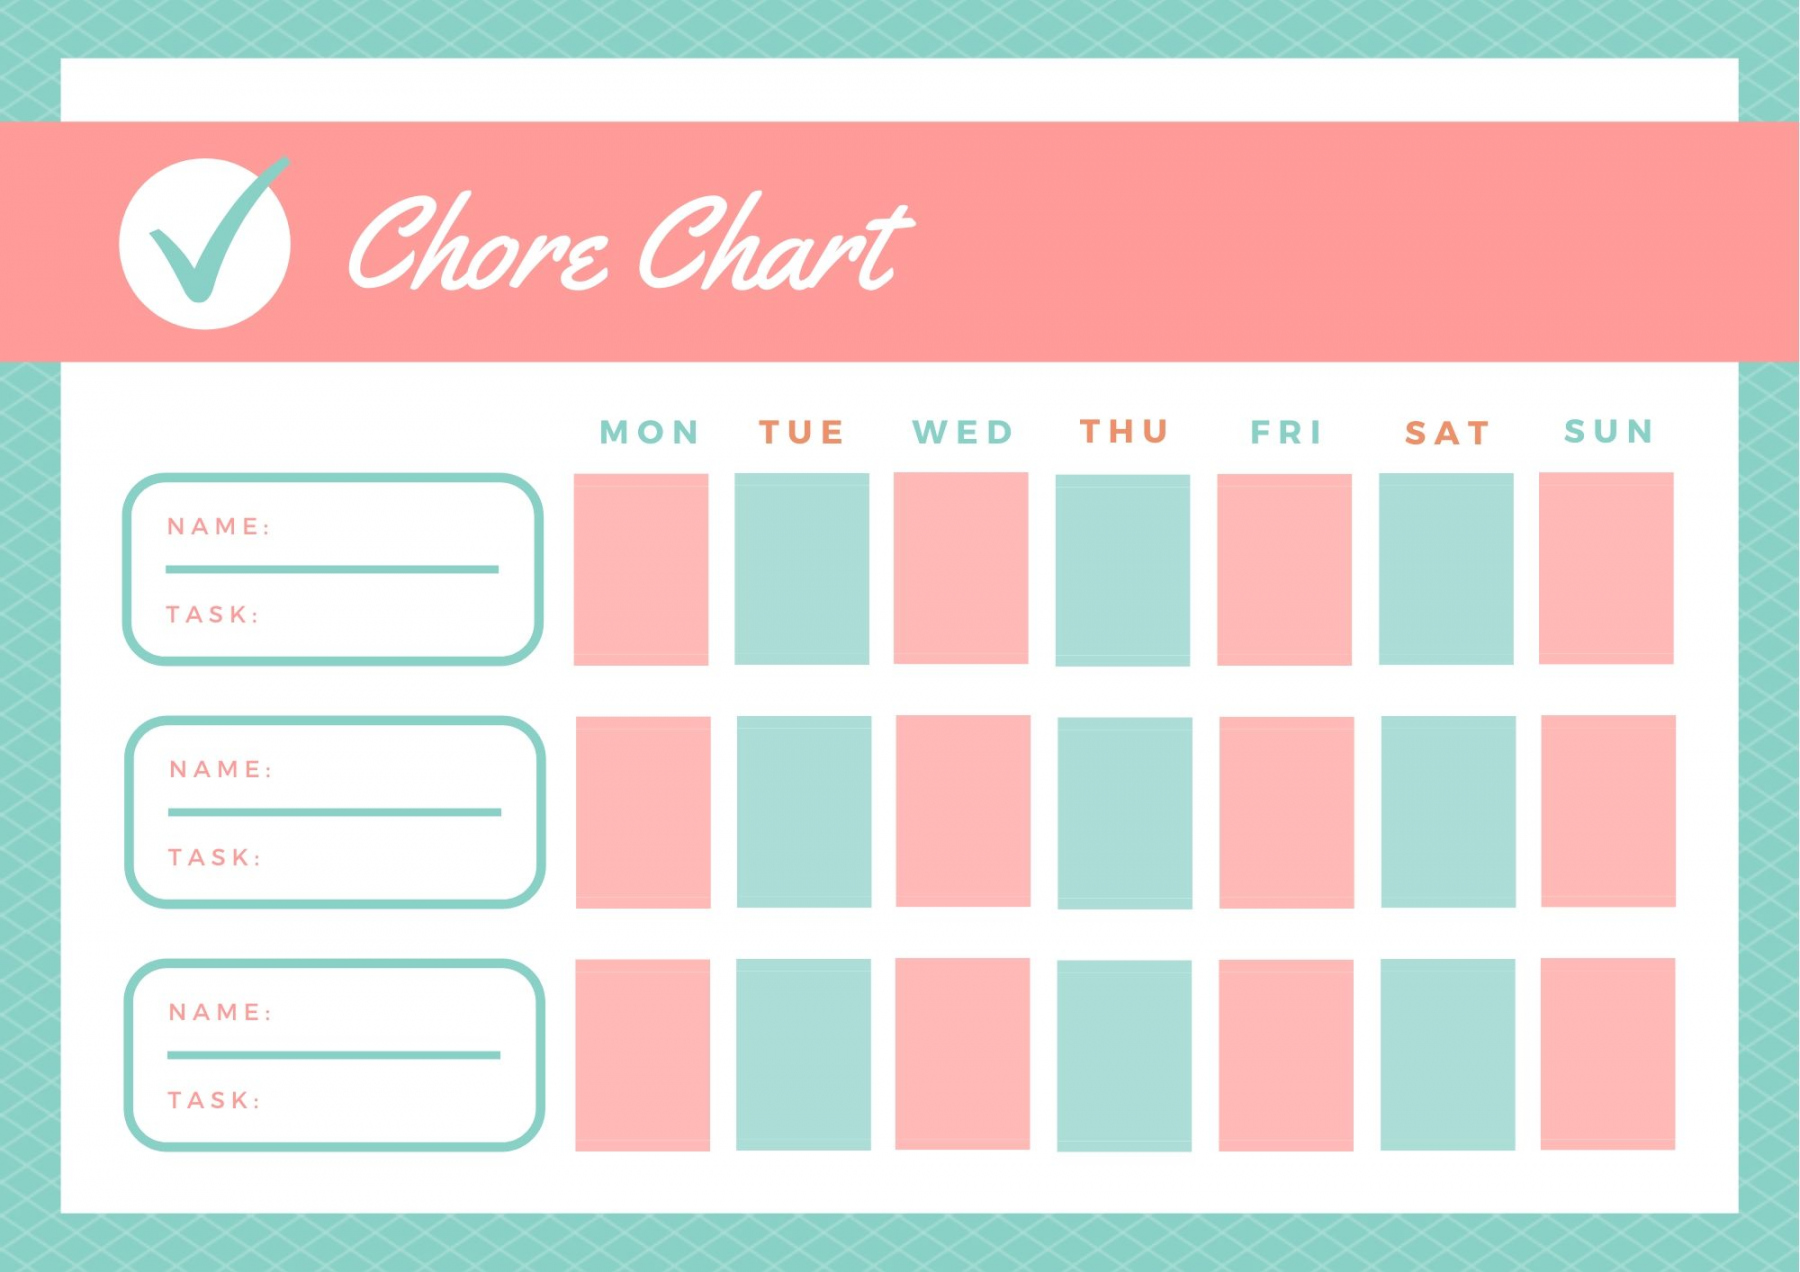 Family Chore Charts Free Printable - My Uncommon Slice of Suburbia - FREE Printables - Free Printable Chore Charts For Family